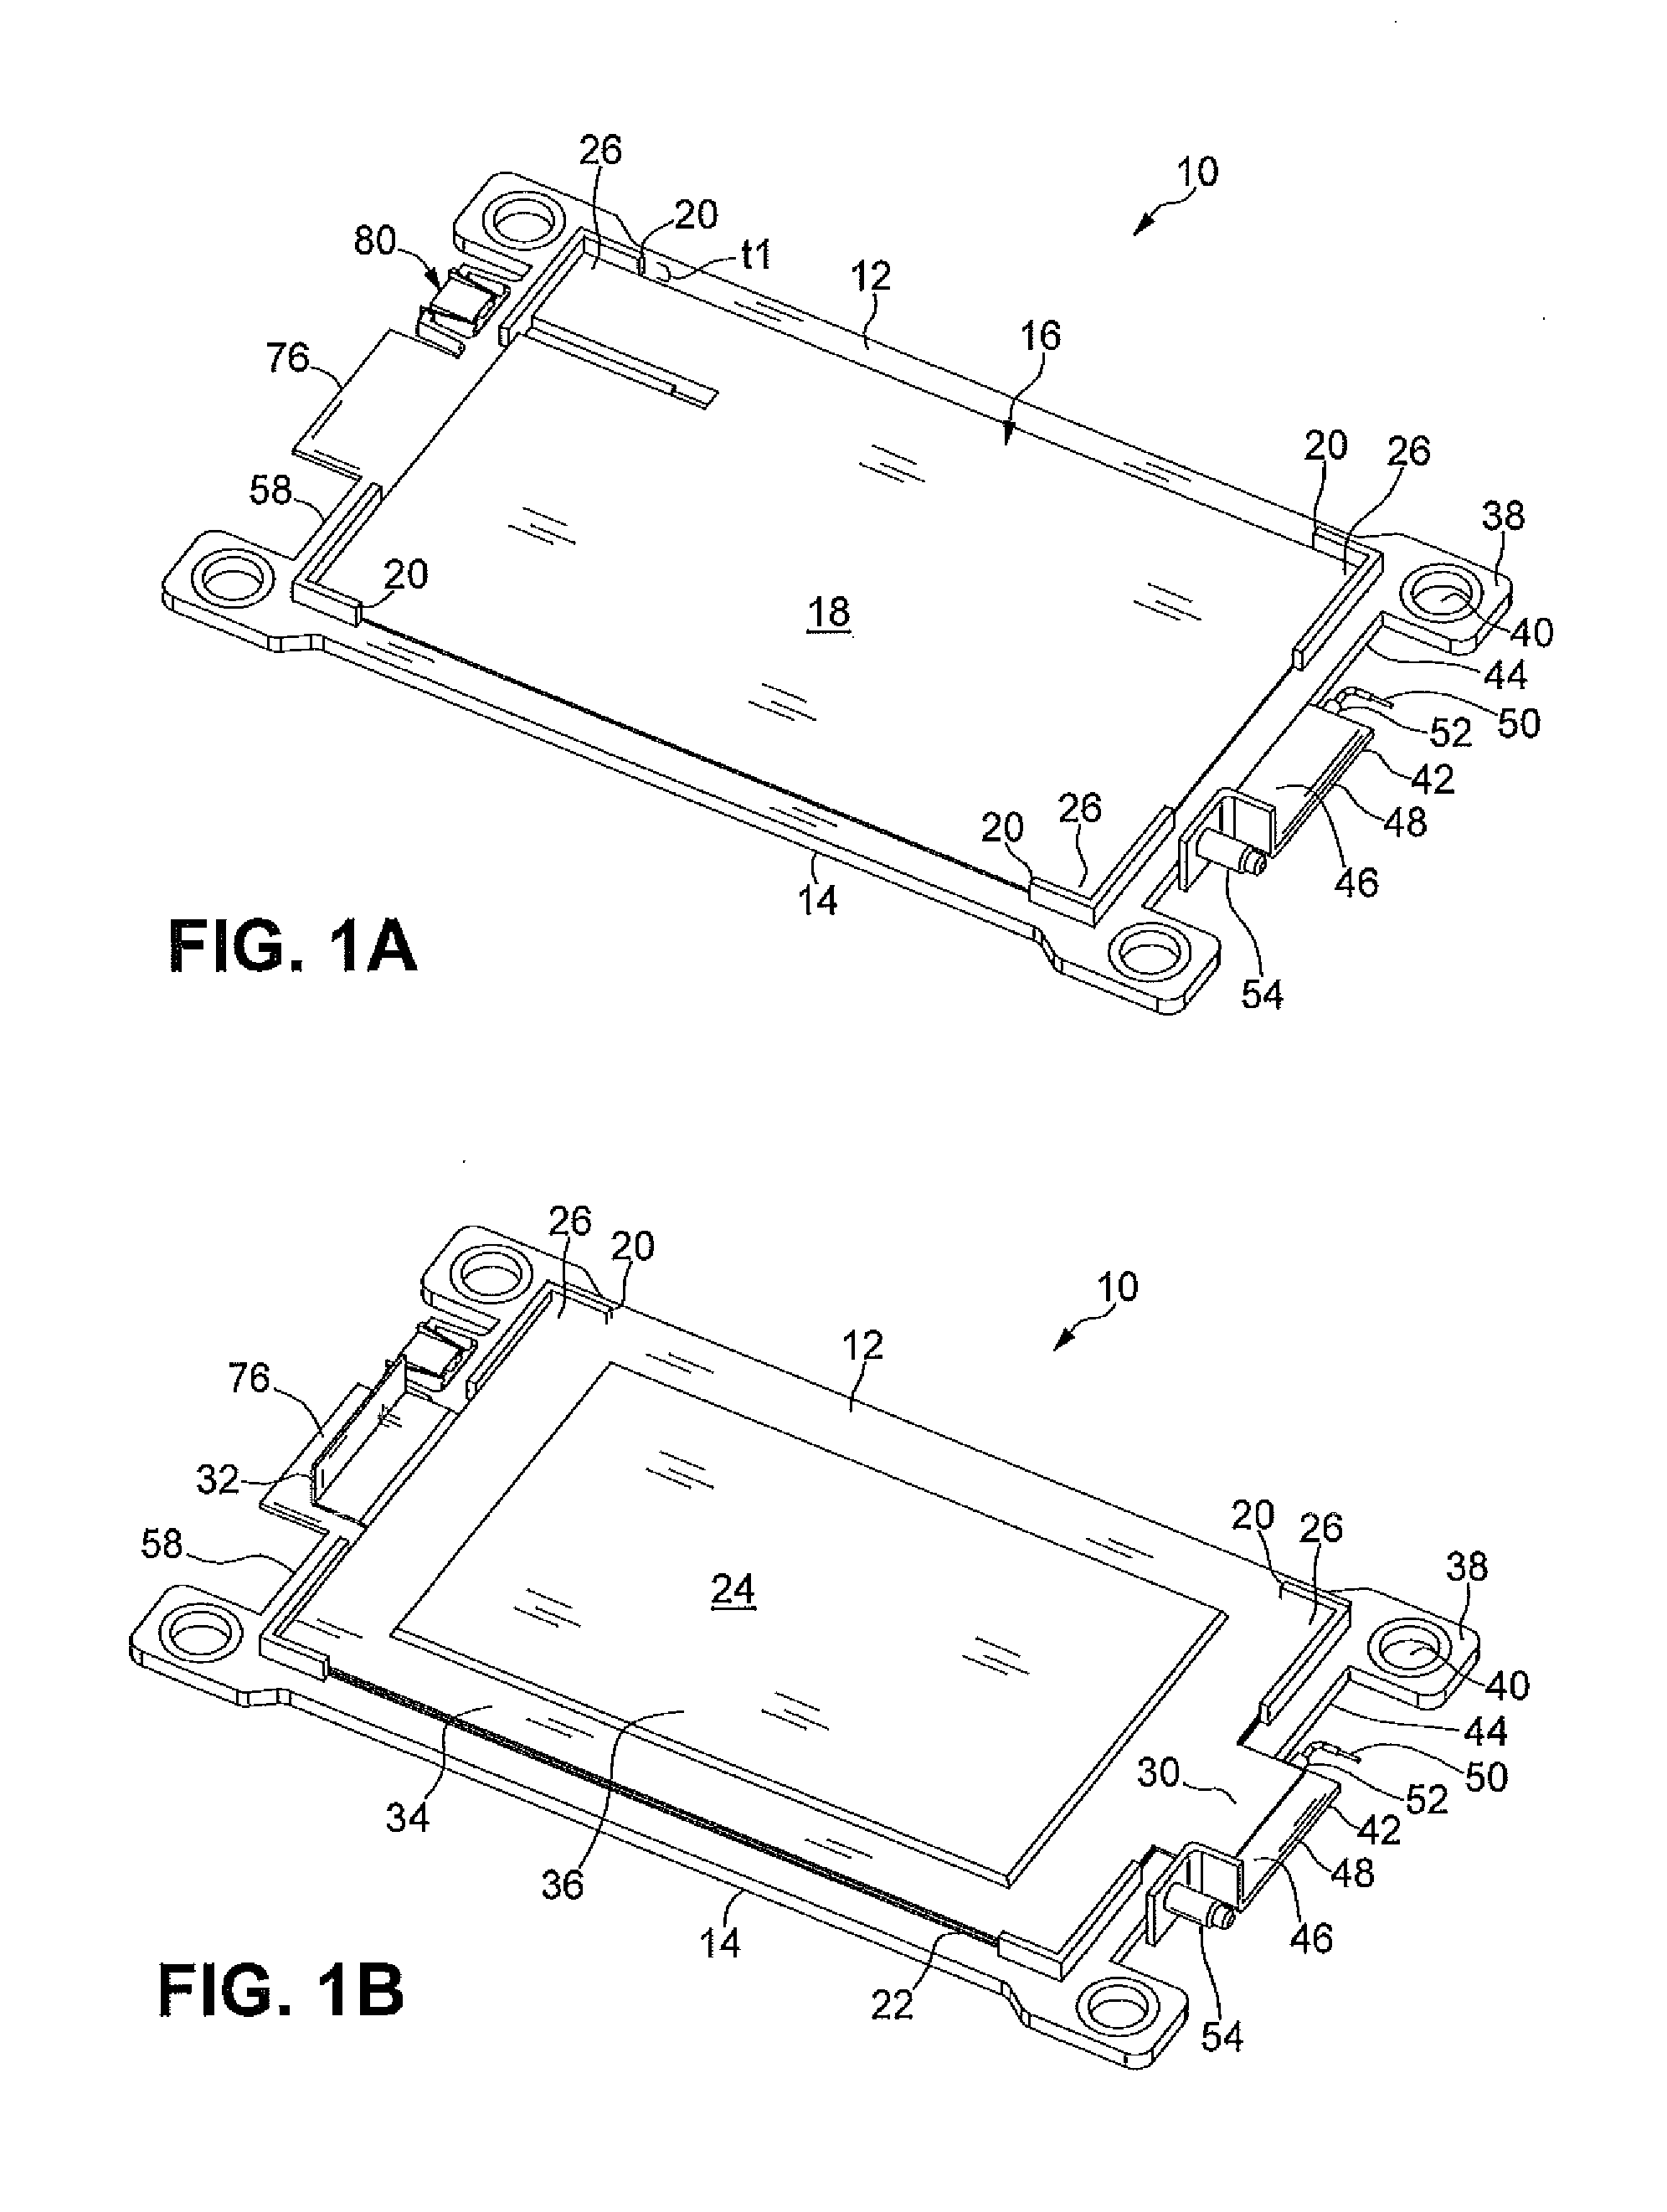 Stackable repeating frame with integrated cell sensing connection